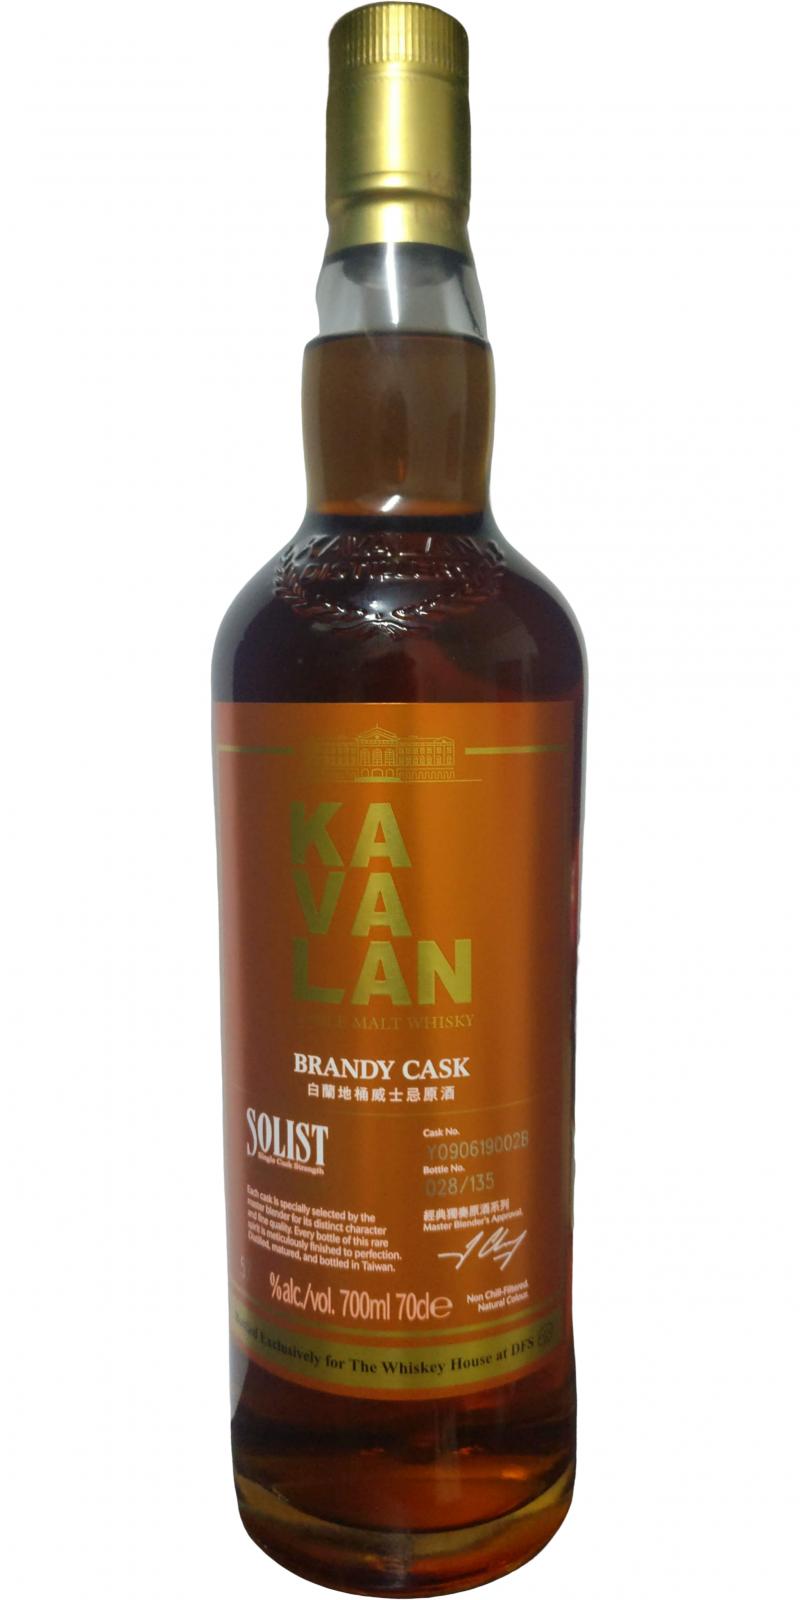 Kavalan Solist Brandy Cask Y090619002B The Whiskey House at DFS 57.1% 700ml